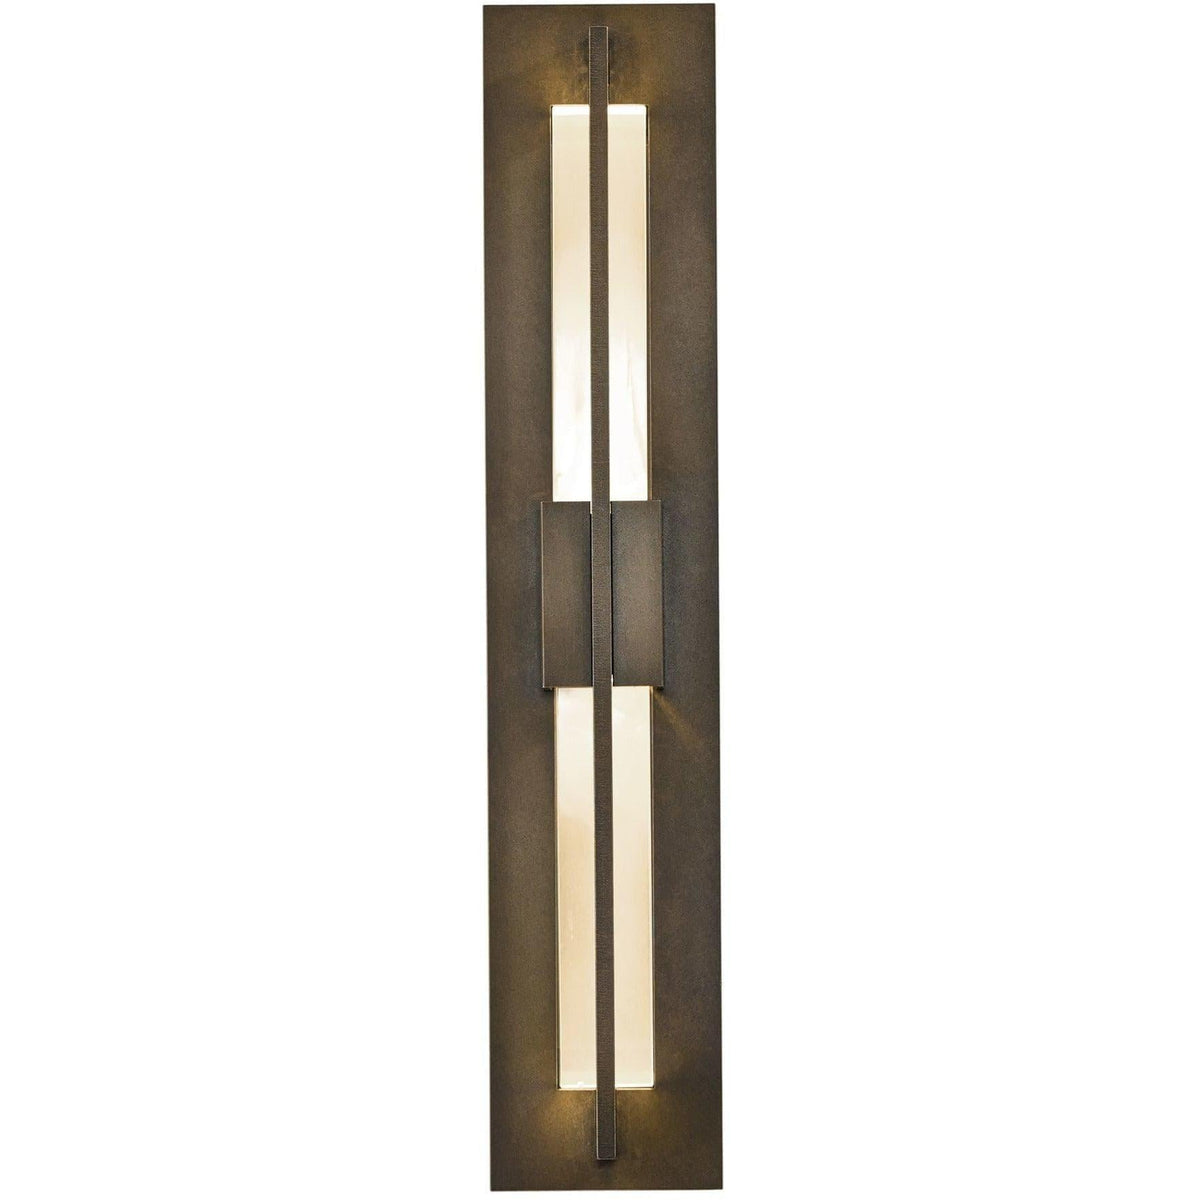 Hubbardton Forge - Axis 23-Inch LED Outdoor Wall Sconce - 306415-LED-75-ZM0331 | Montreal Lighting & Hardware